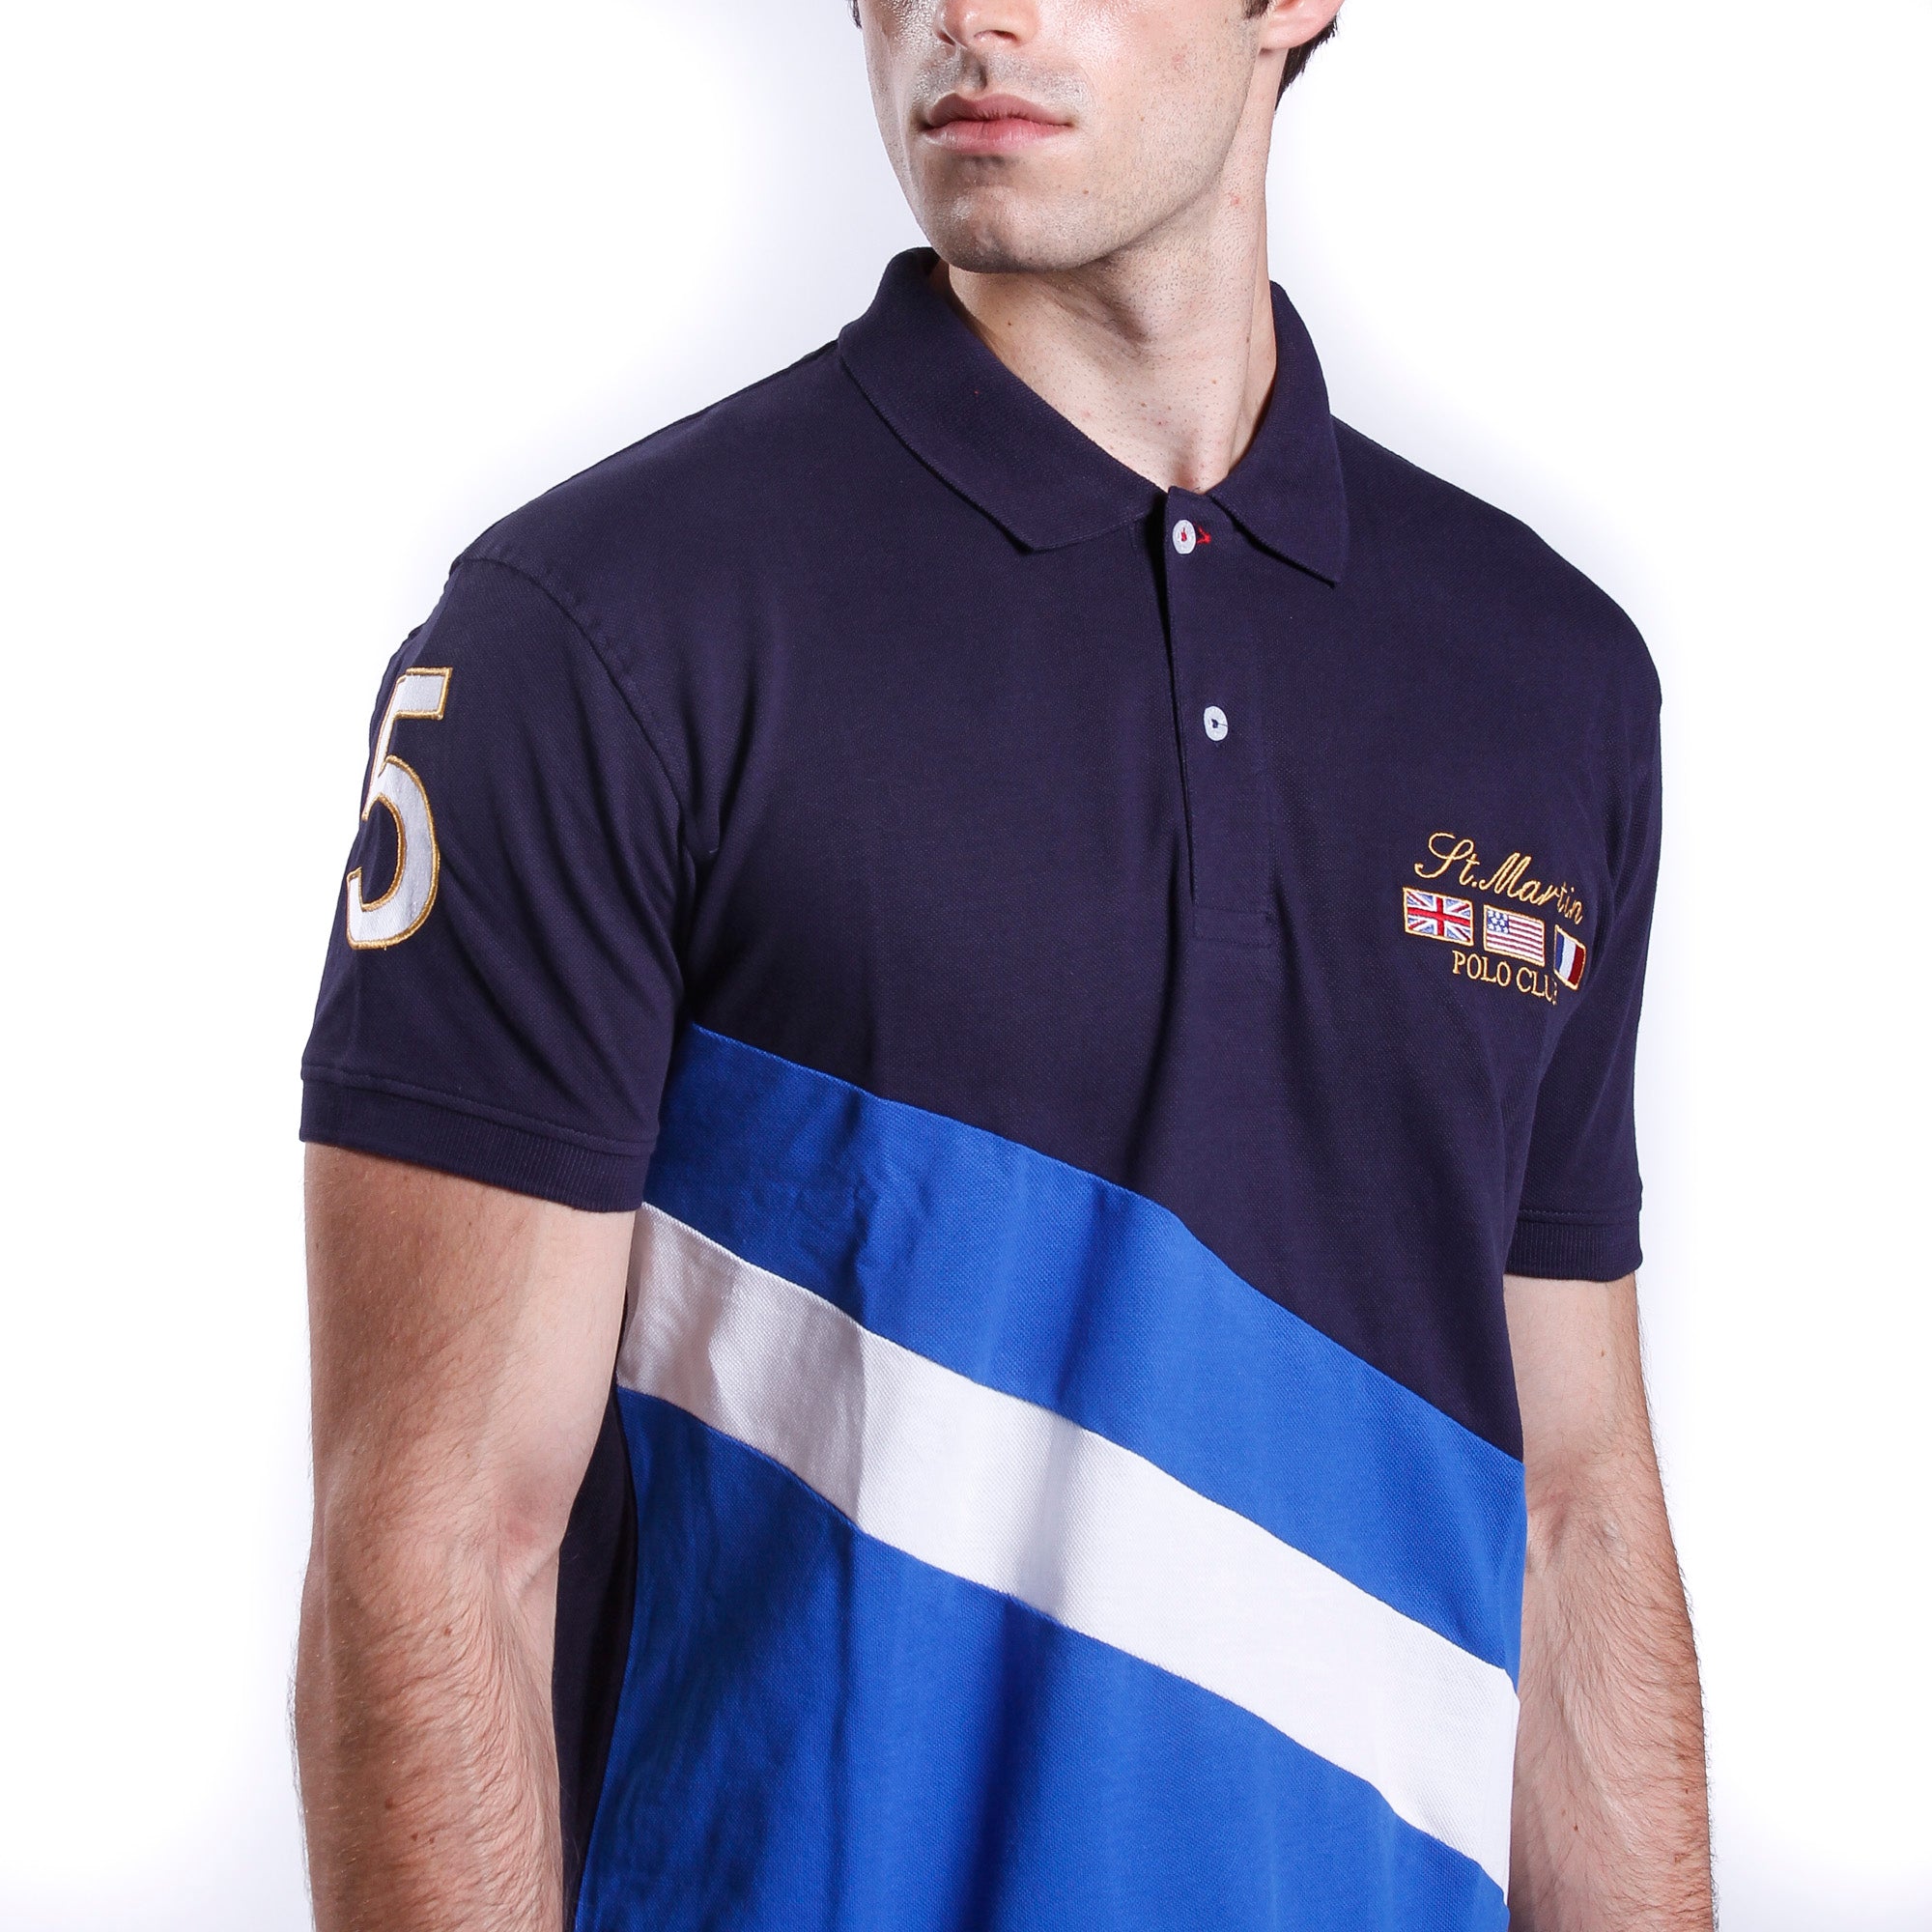 Piqué polo shirt with special cut and embroidery on the sleeve